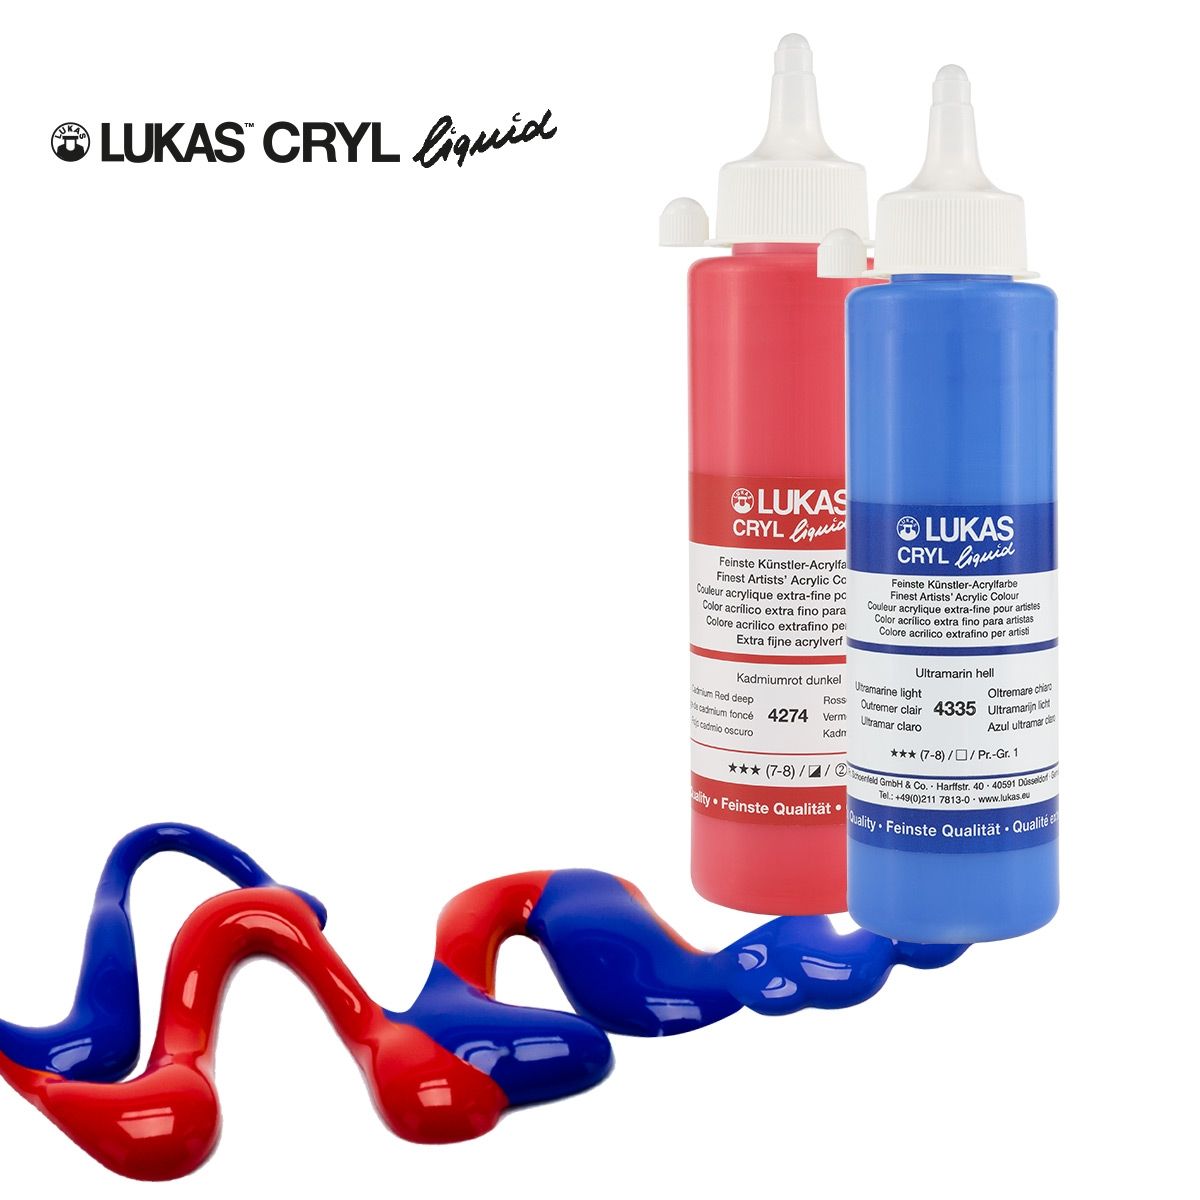 LUKAS CRYL Liquid Acrylics - Use as smooth bodied acrylic for pouring and other art